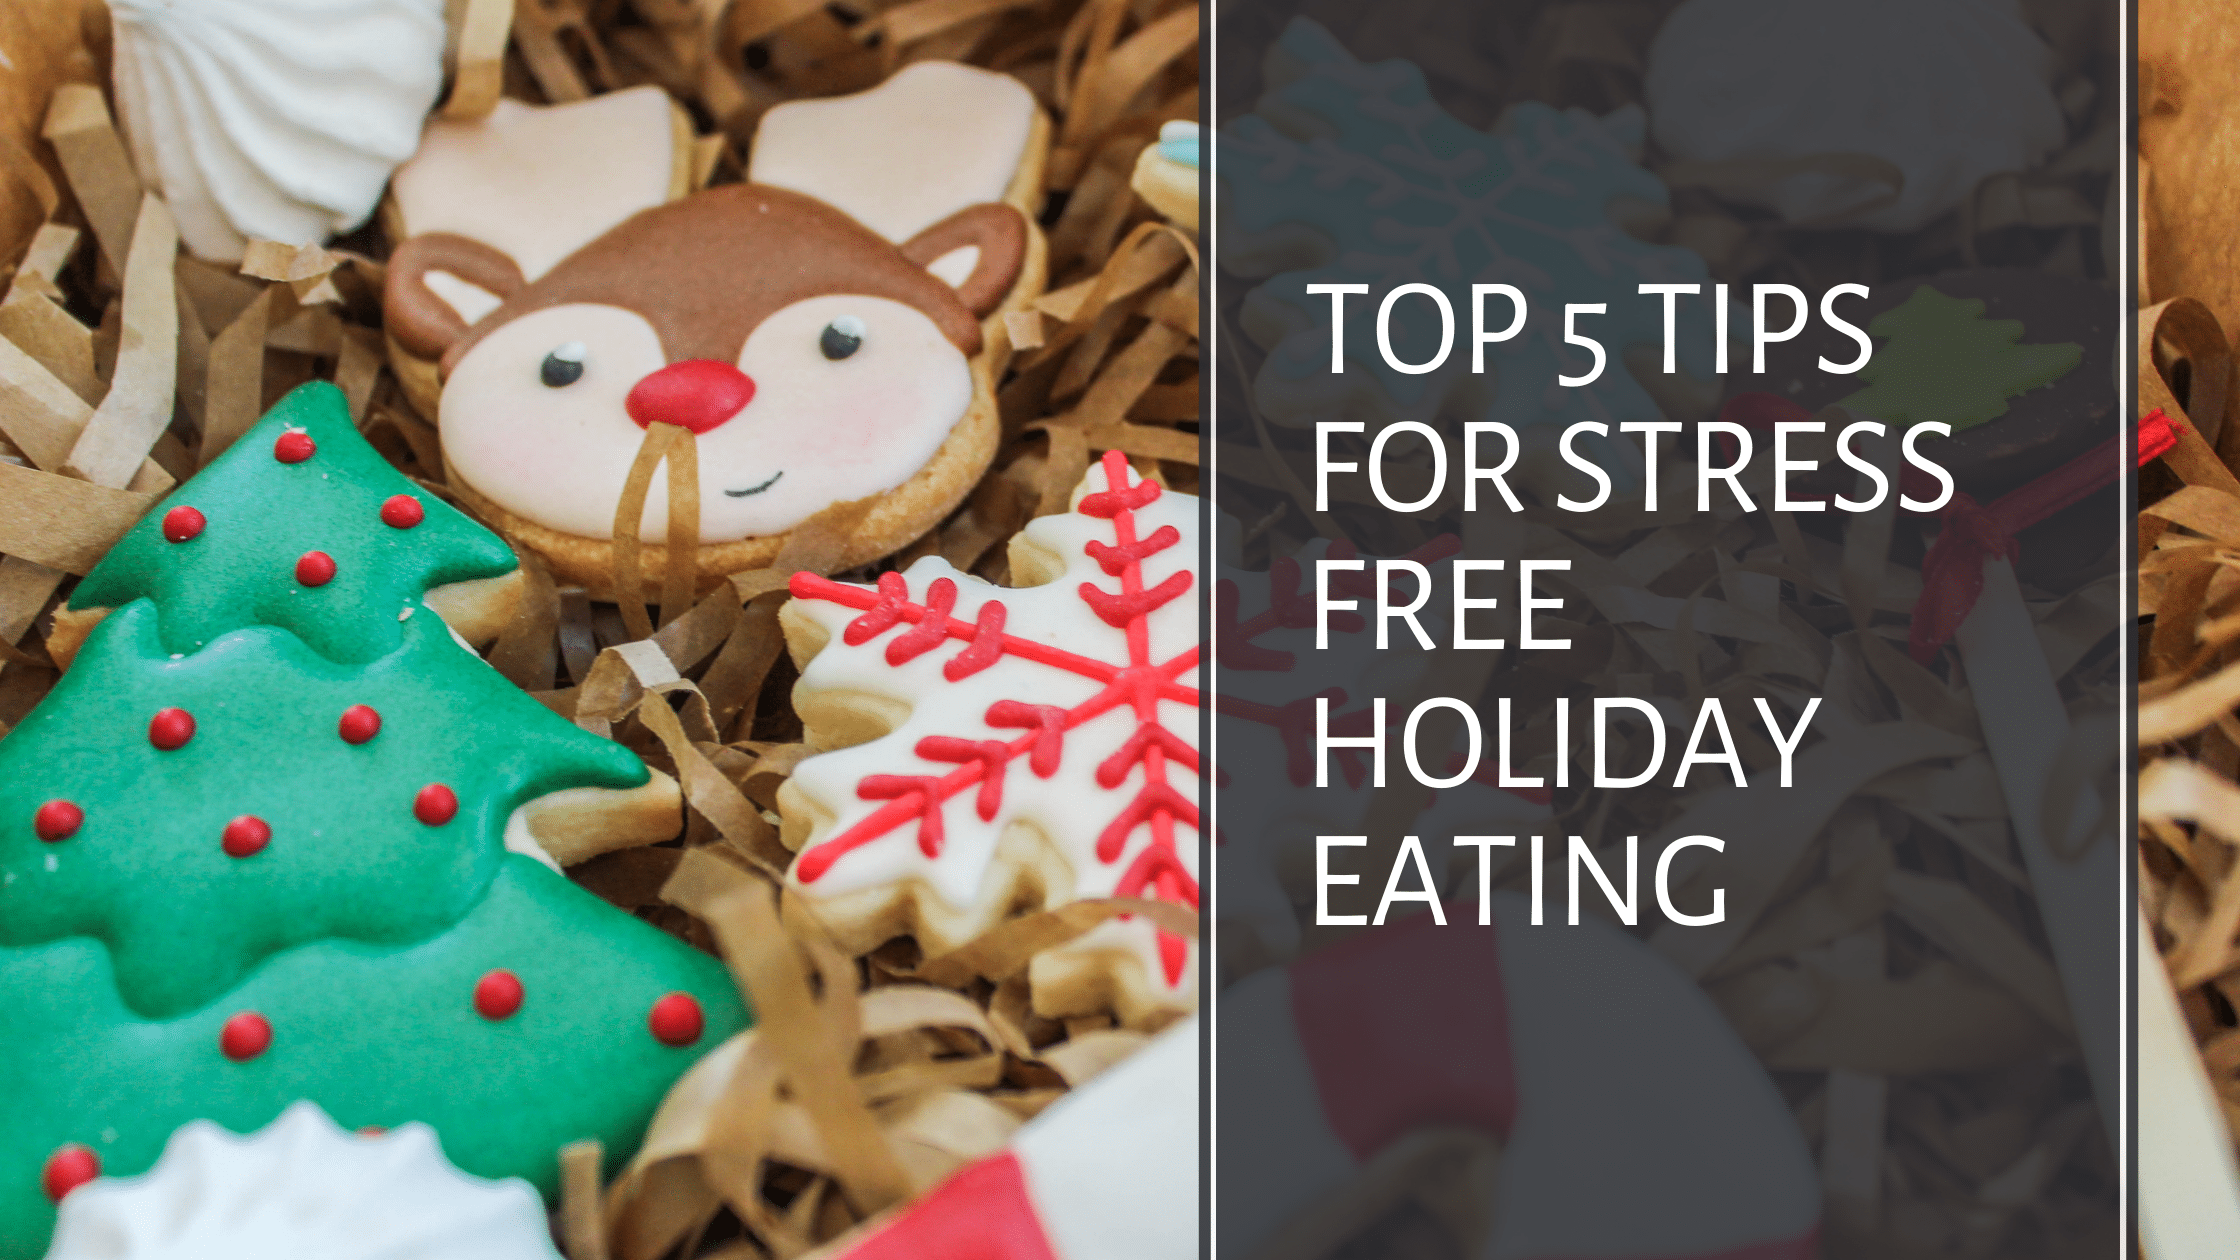 Top 5 tips for stress free holiday eating